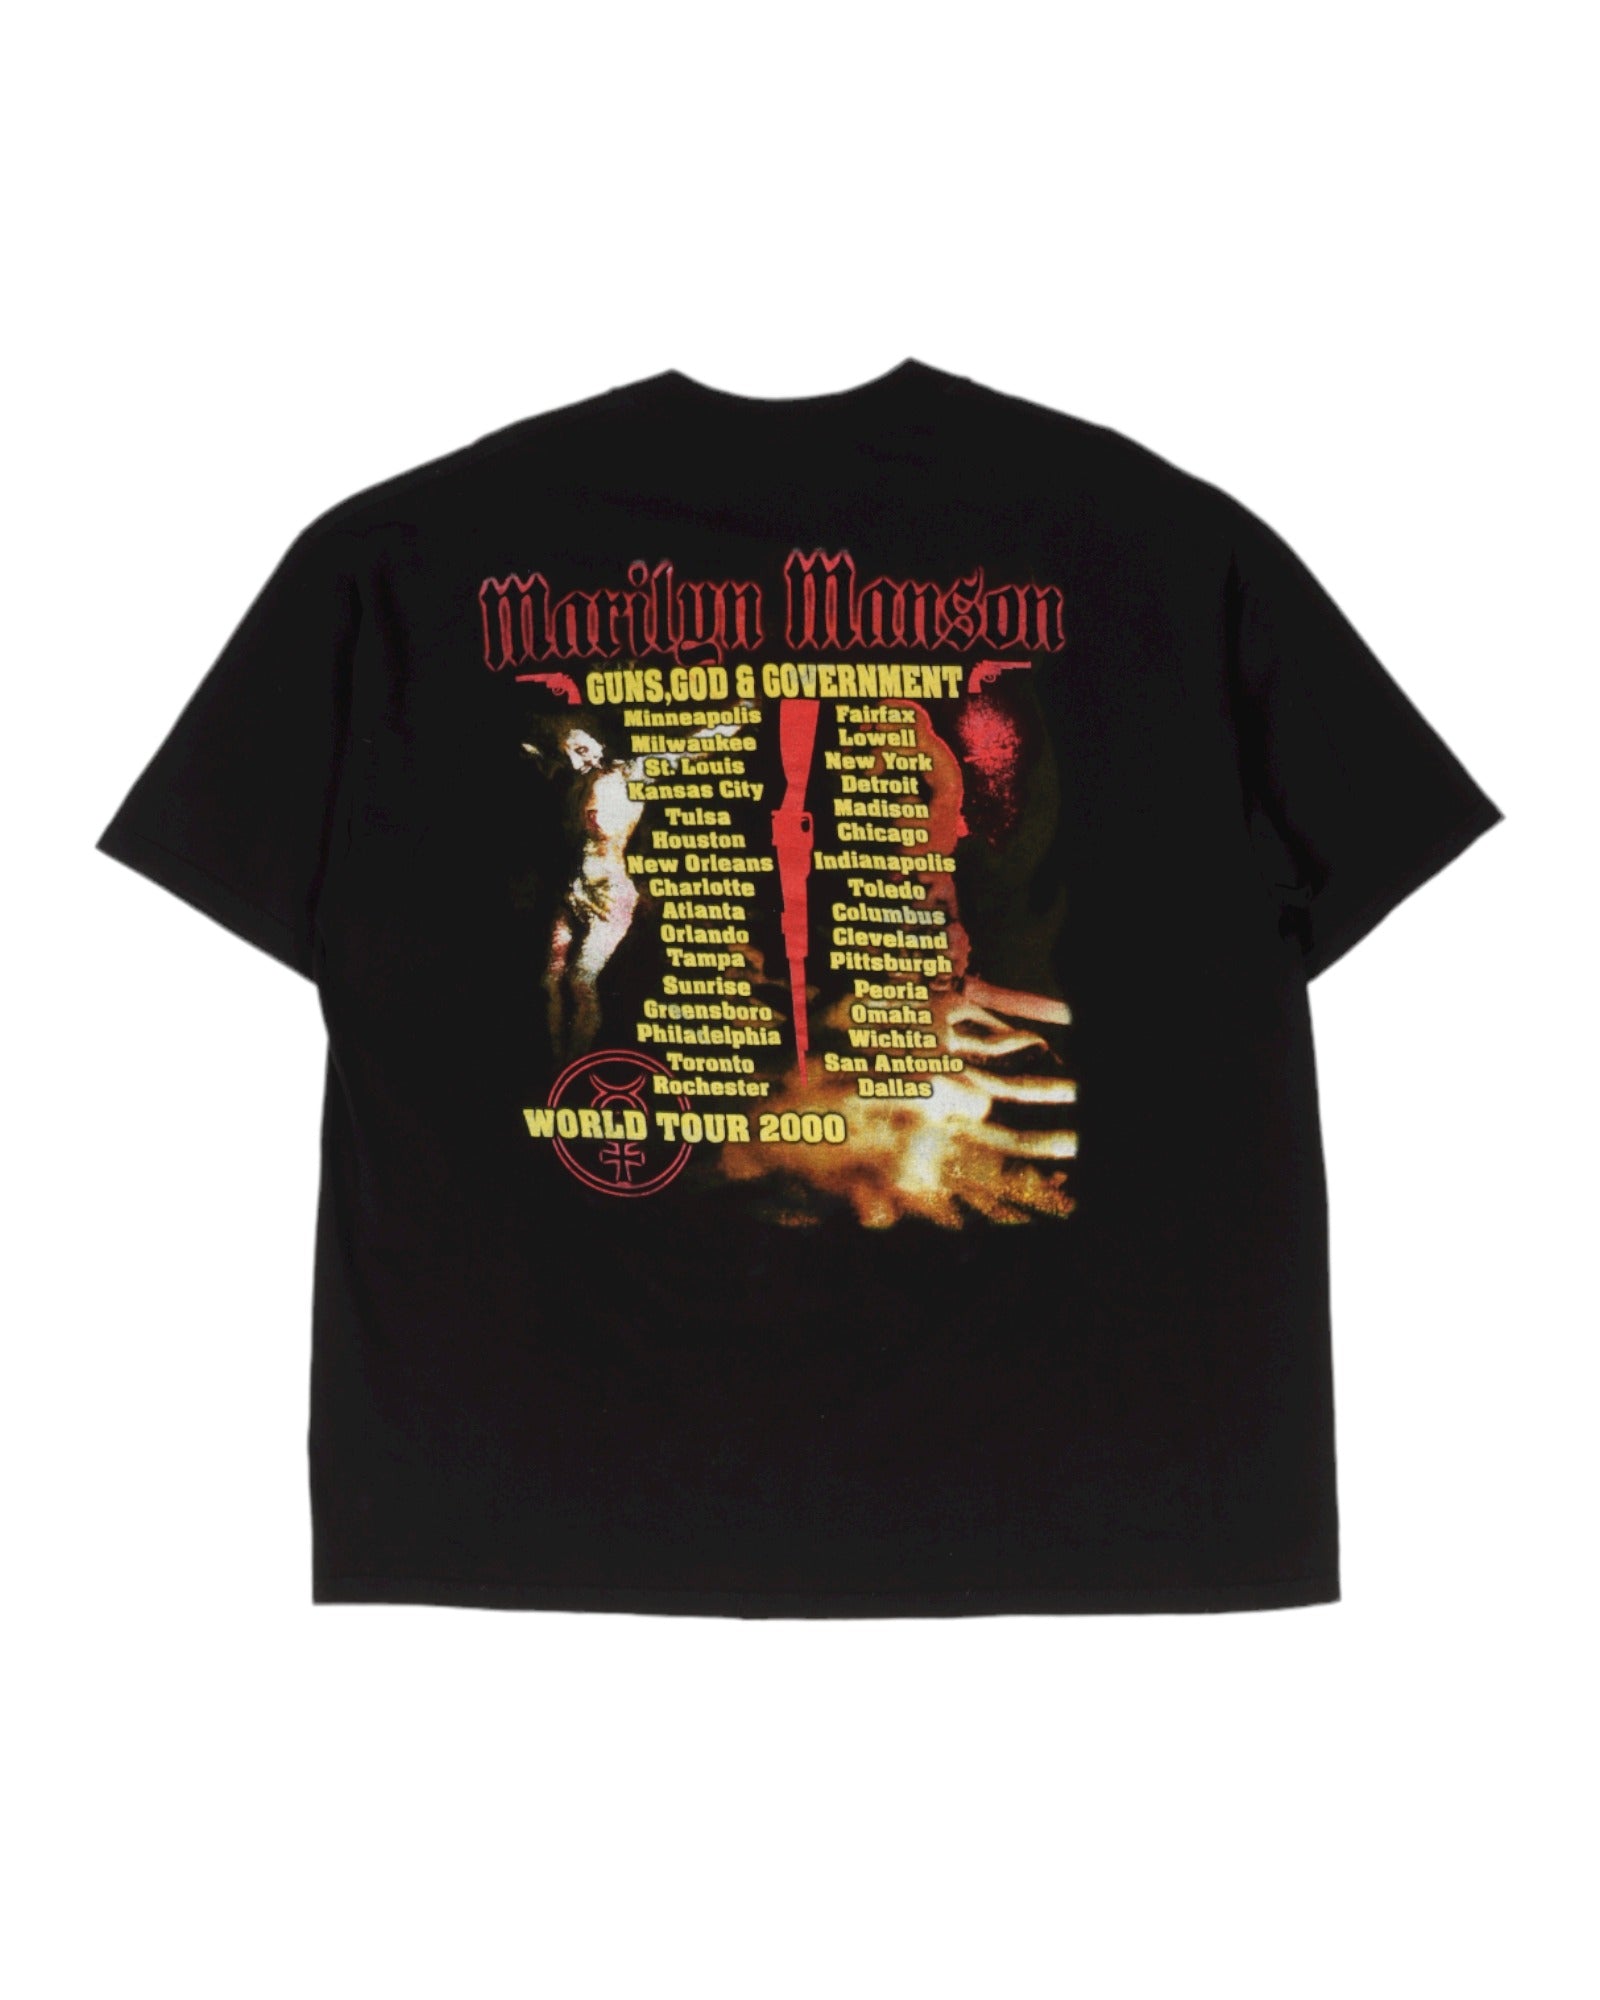 Marilyn Manson "Guns God and Government" Tour T-Shirt